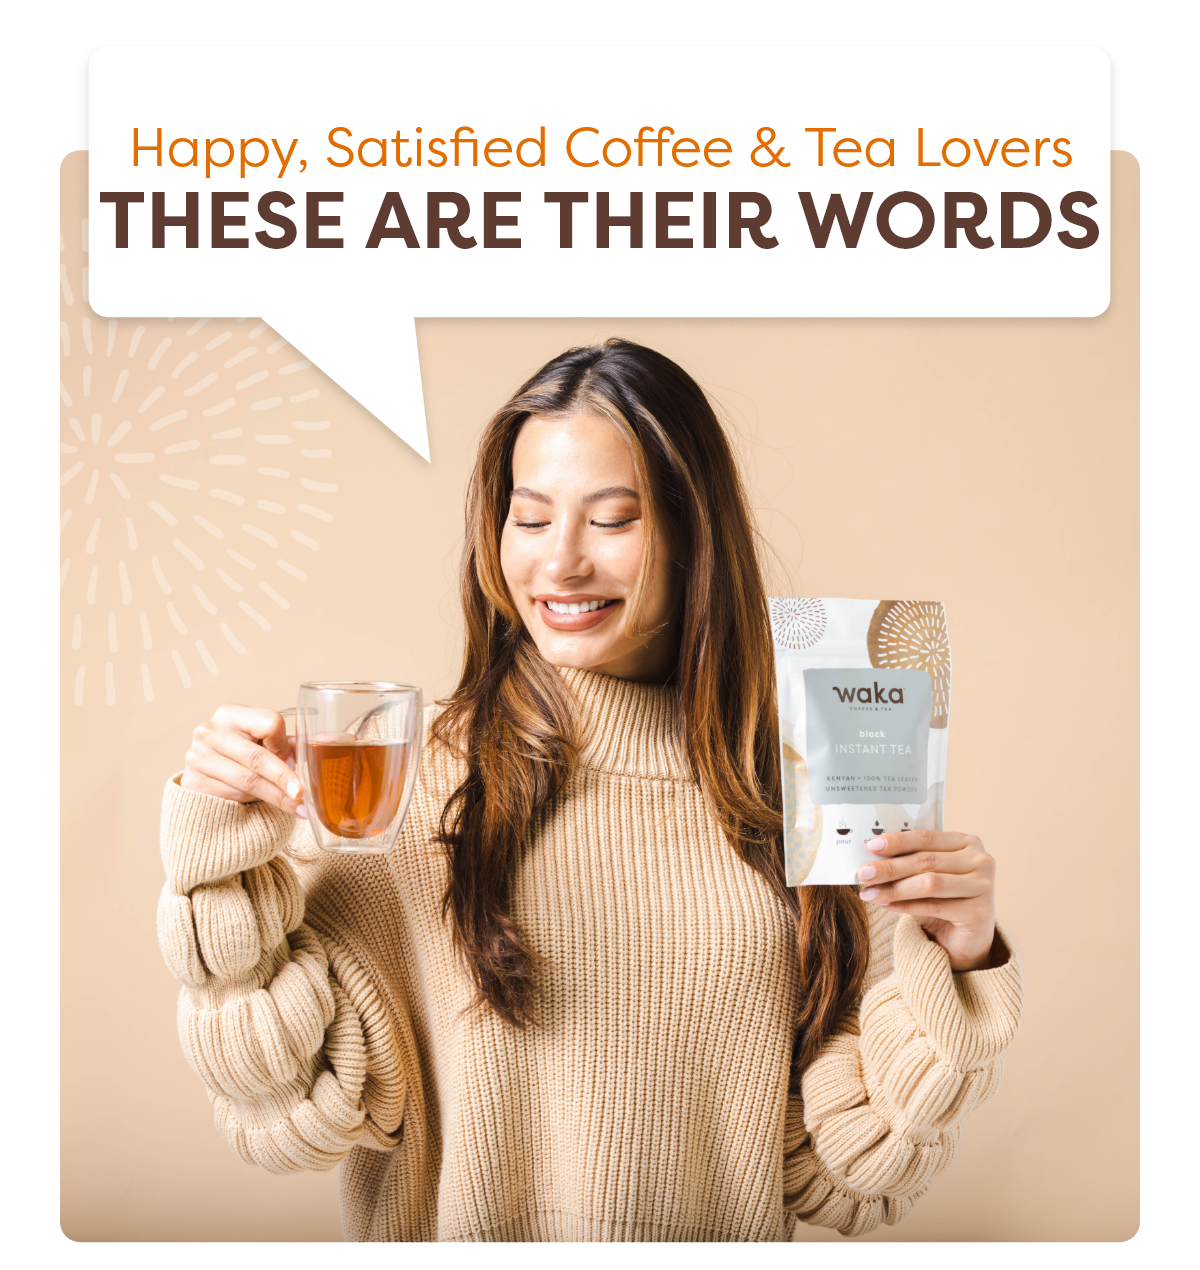 Happy, Satisfied Coffee & Tea Lovers These Are Their Words